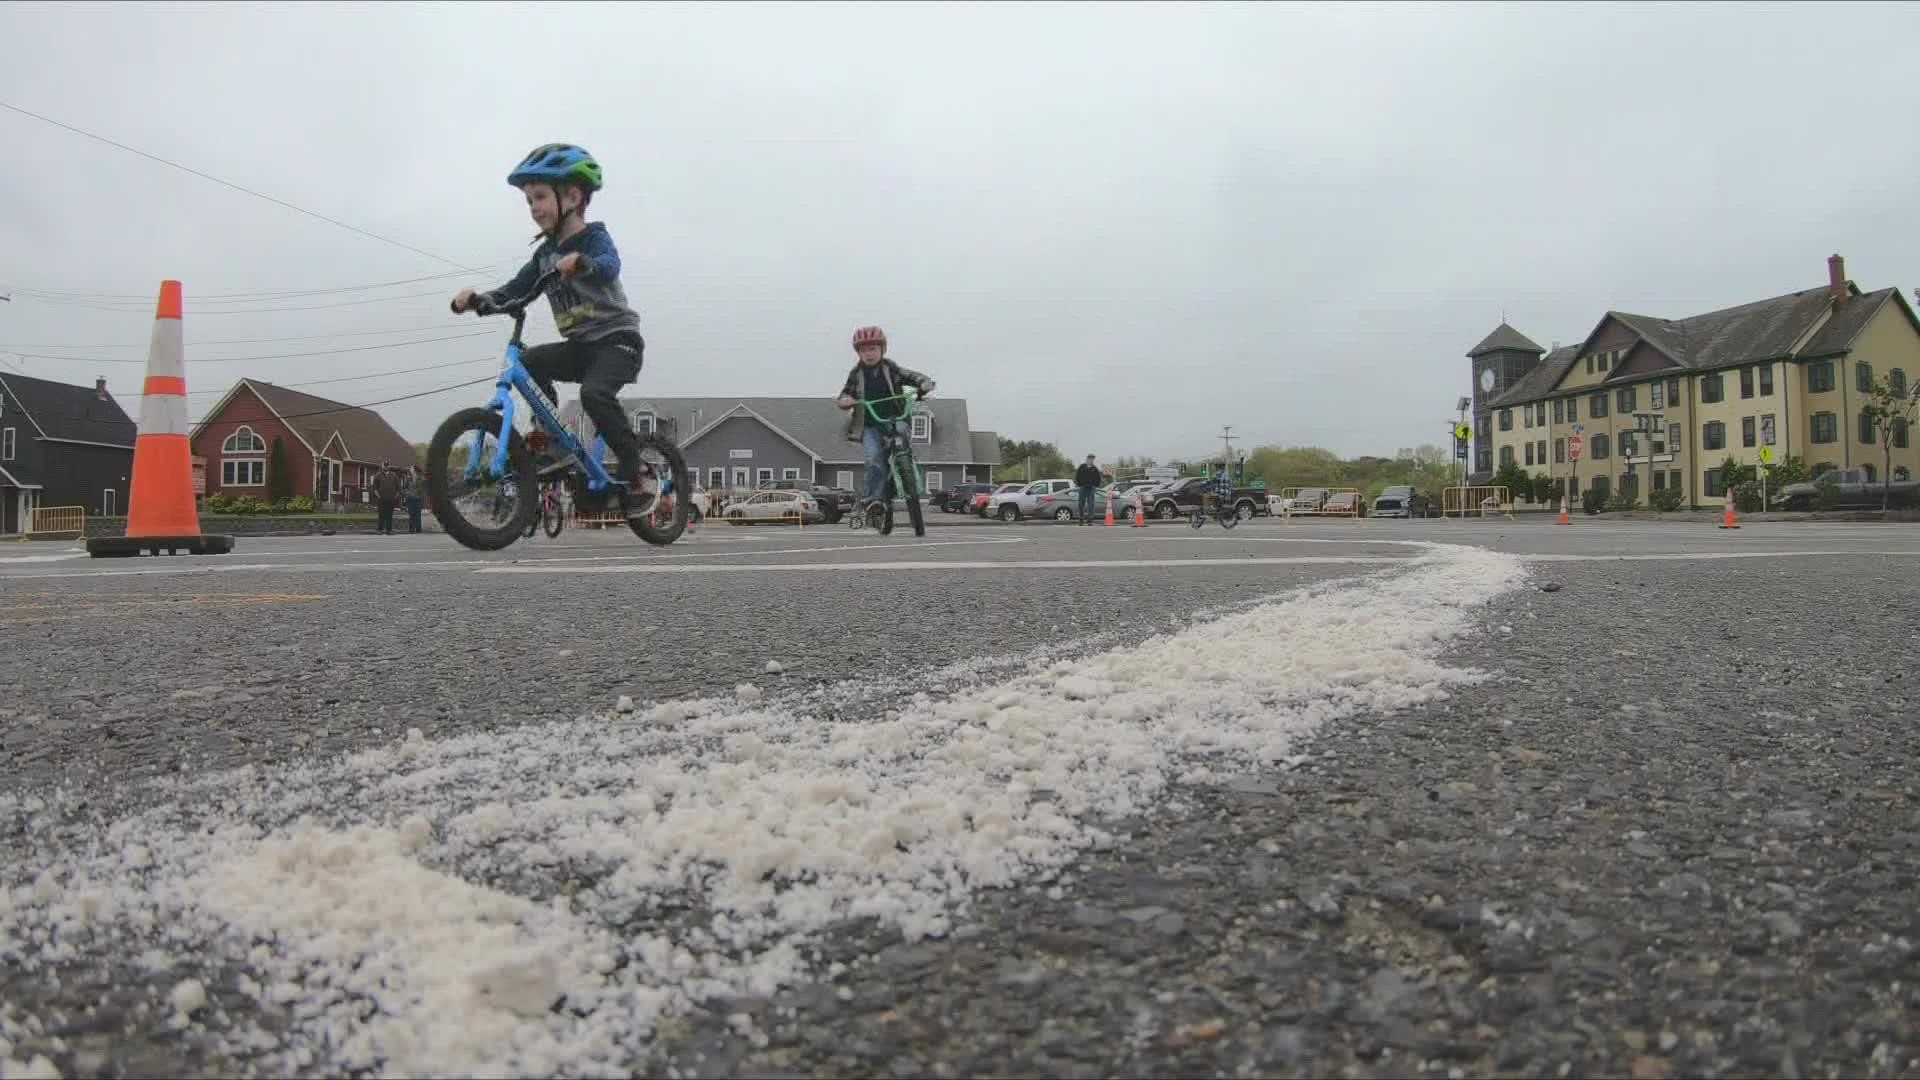 Kids ages 4 to 10 got a bike safety check and could ride through an obstacle course that taught them about traffic laws.